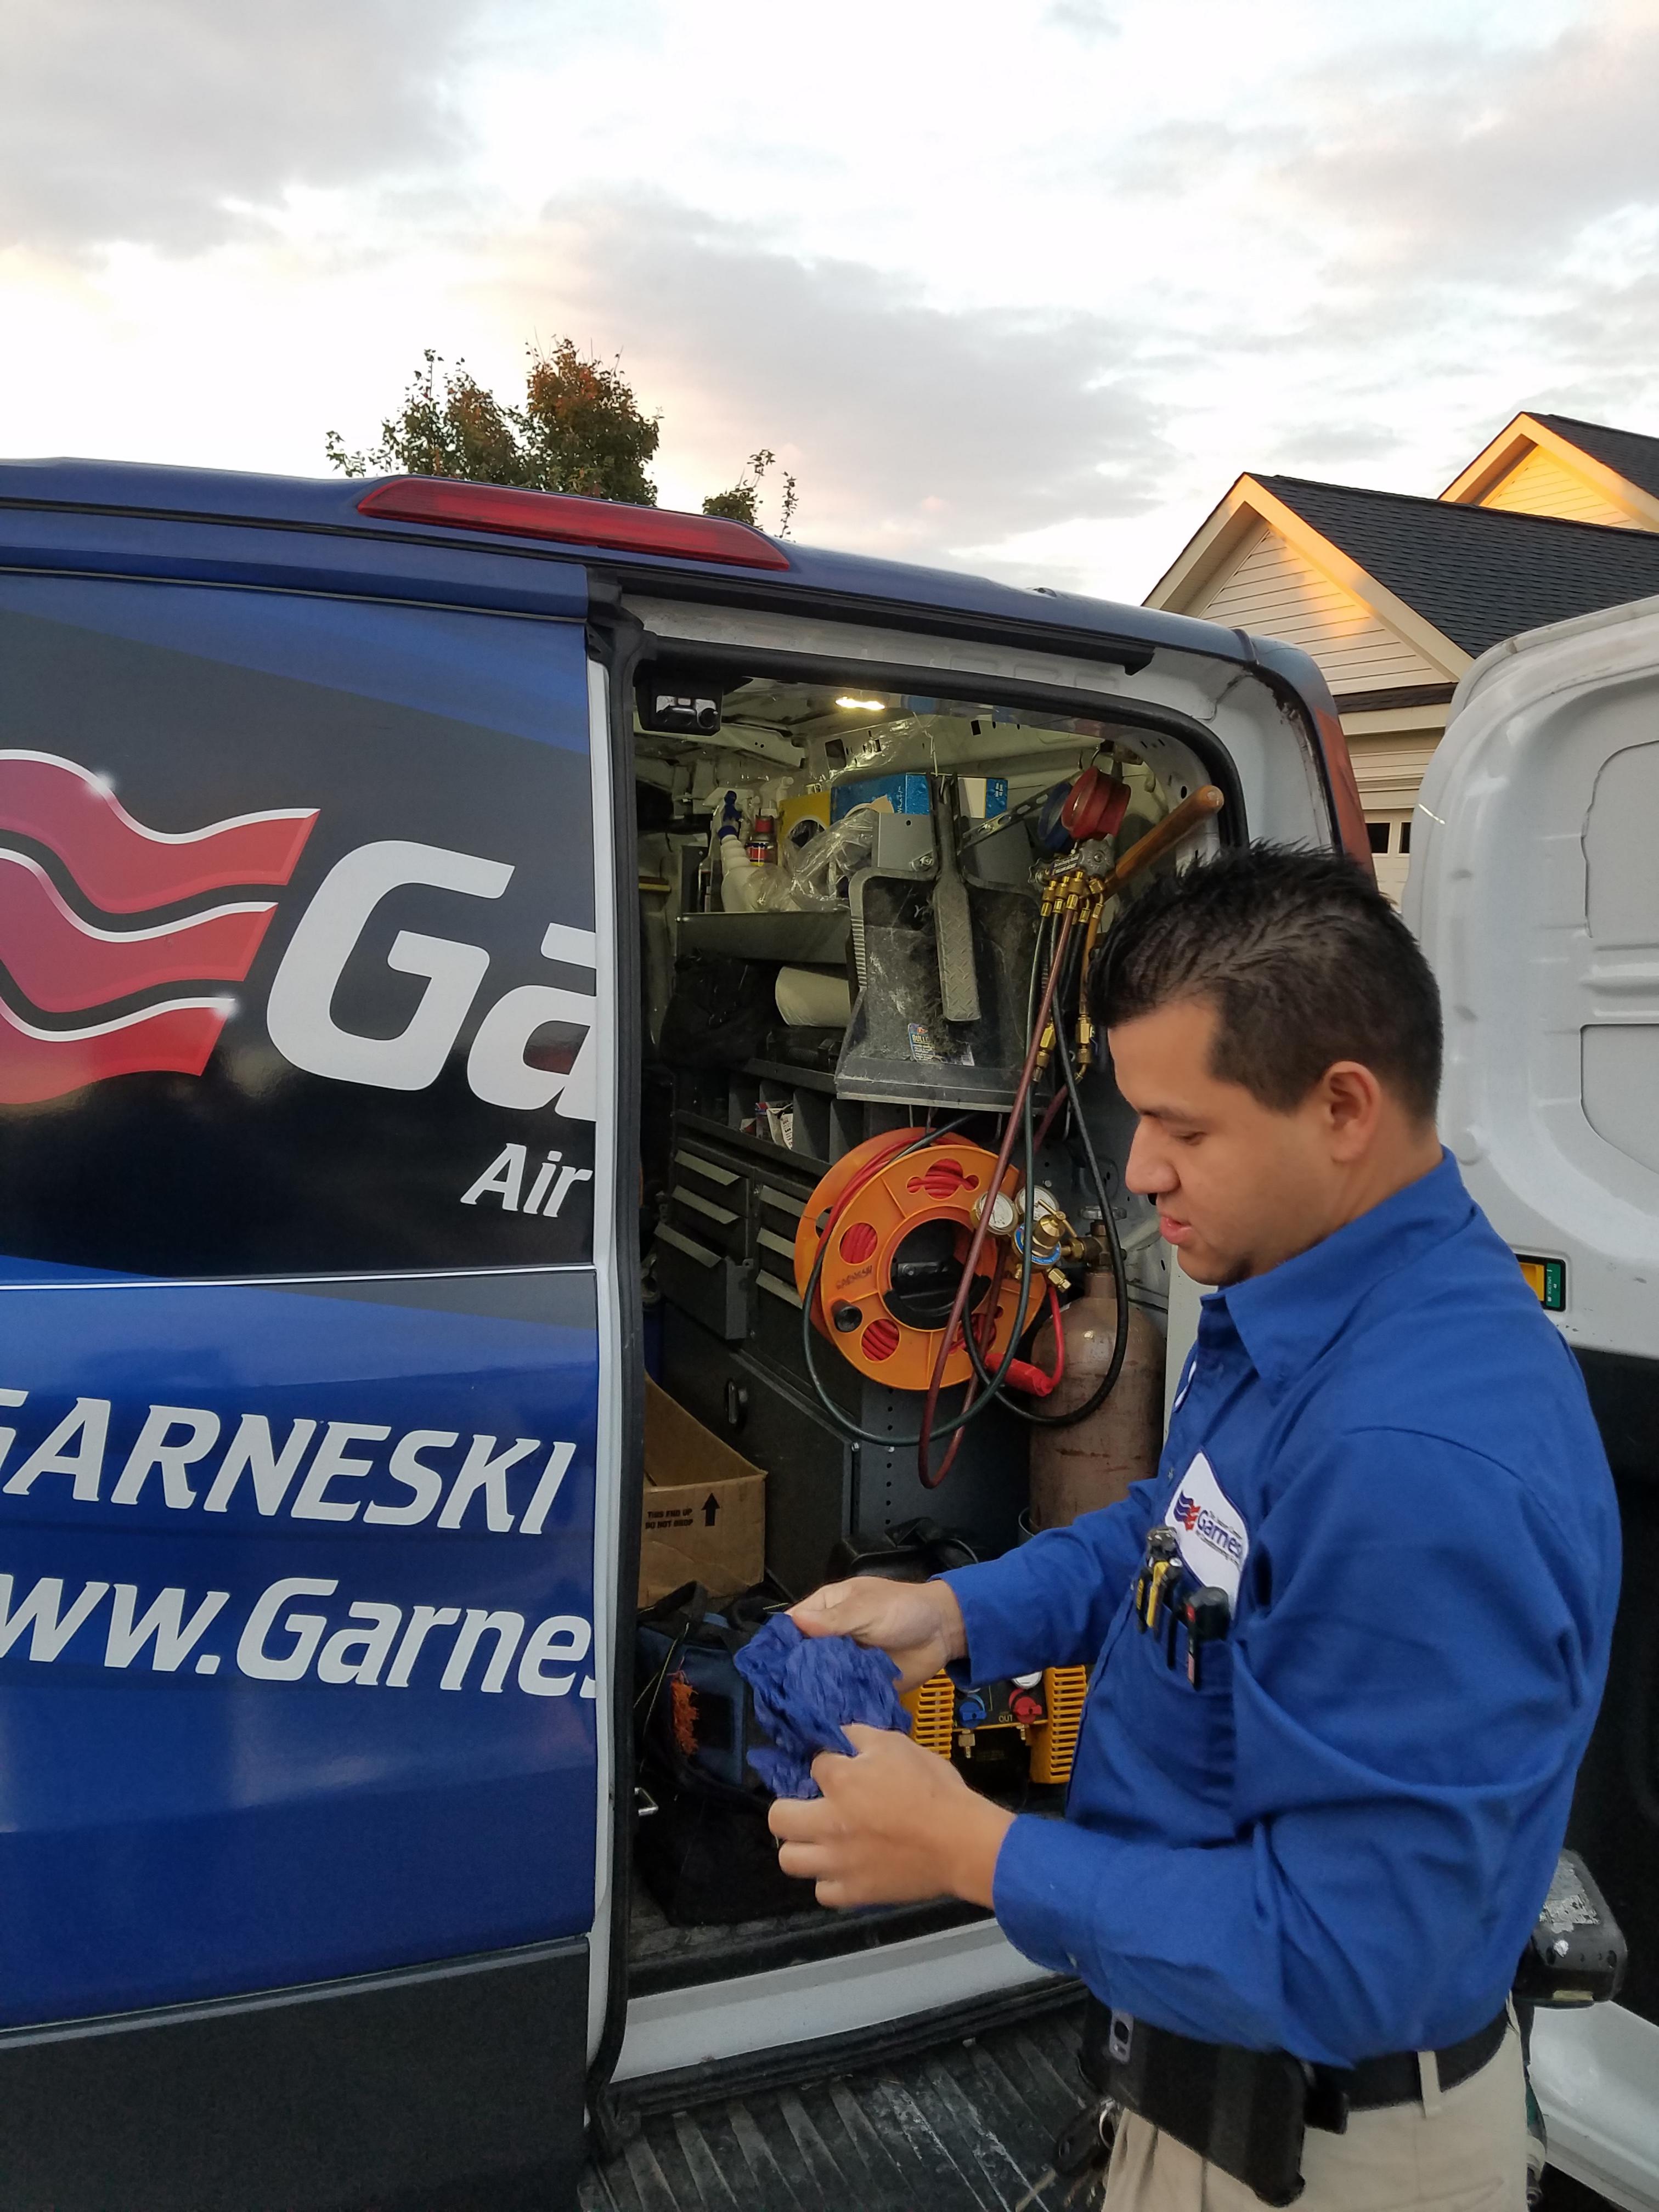 Booties-go-on-to-protect-customers-home-Garneski-Air-Conditioning-and-Heating Garneski Air Conditioning & Heating Co Sterling (703)880-2770